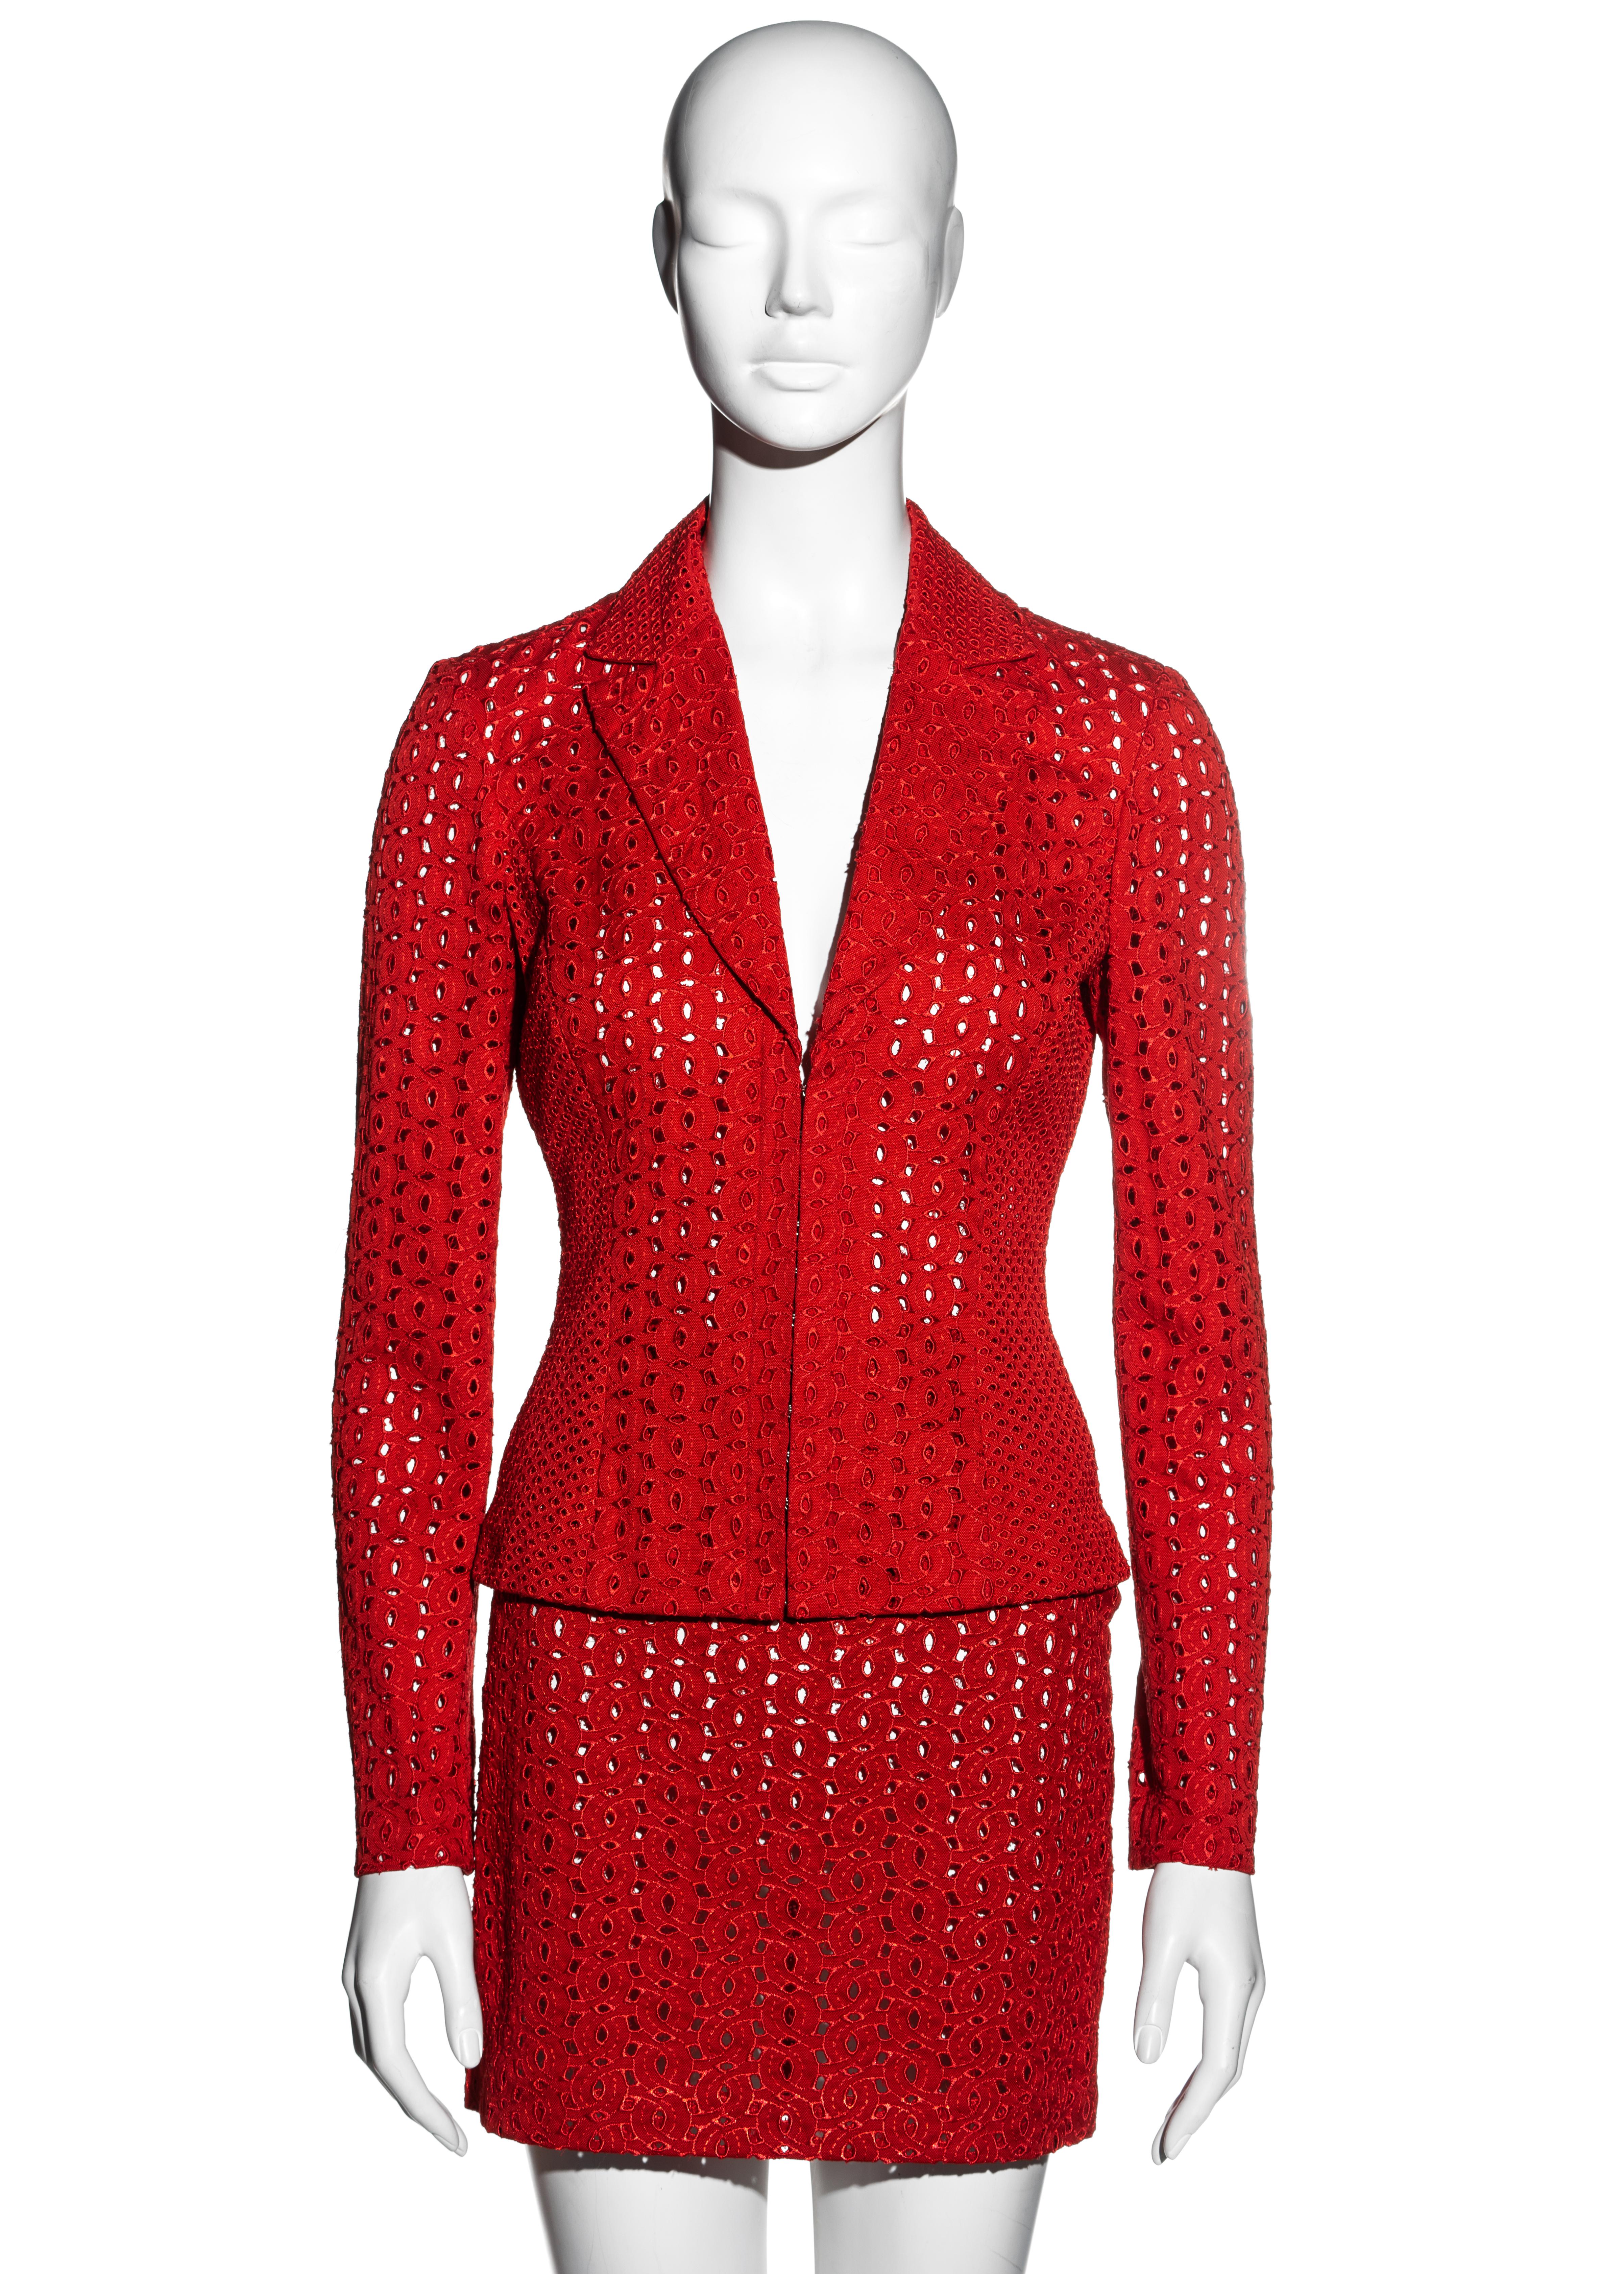 ▪ Gianni Versace red cotton mini skirt suit
▪ Cutwork technique
▪ Fitted jacket with metal corset hooks 
▪ High waisted mini skirt 
▪ IT 40 - FR 36 - UK 8 - US 4
▪ Spring-Summer 2002 